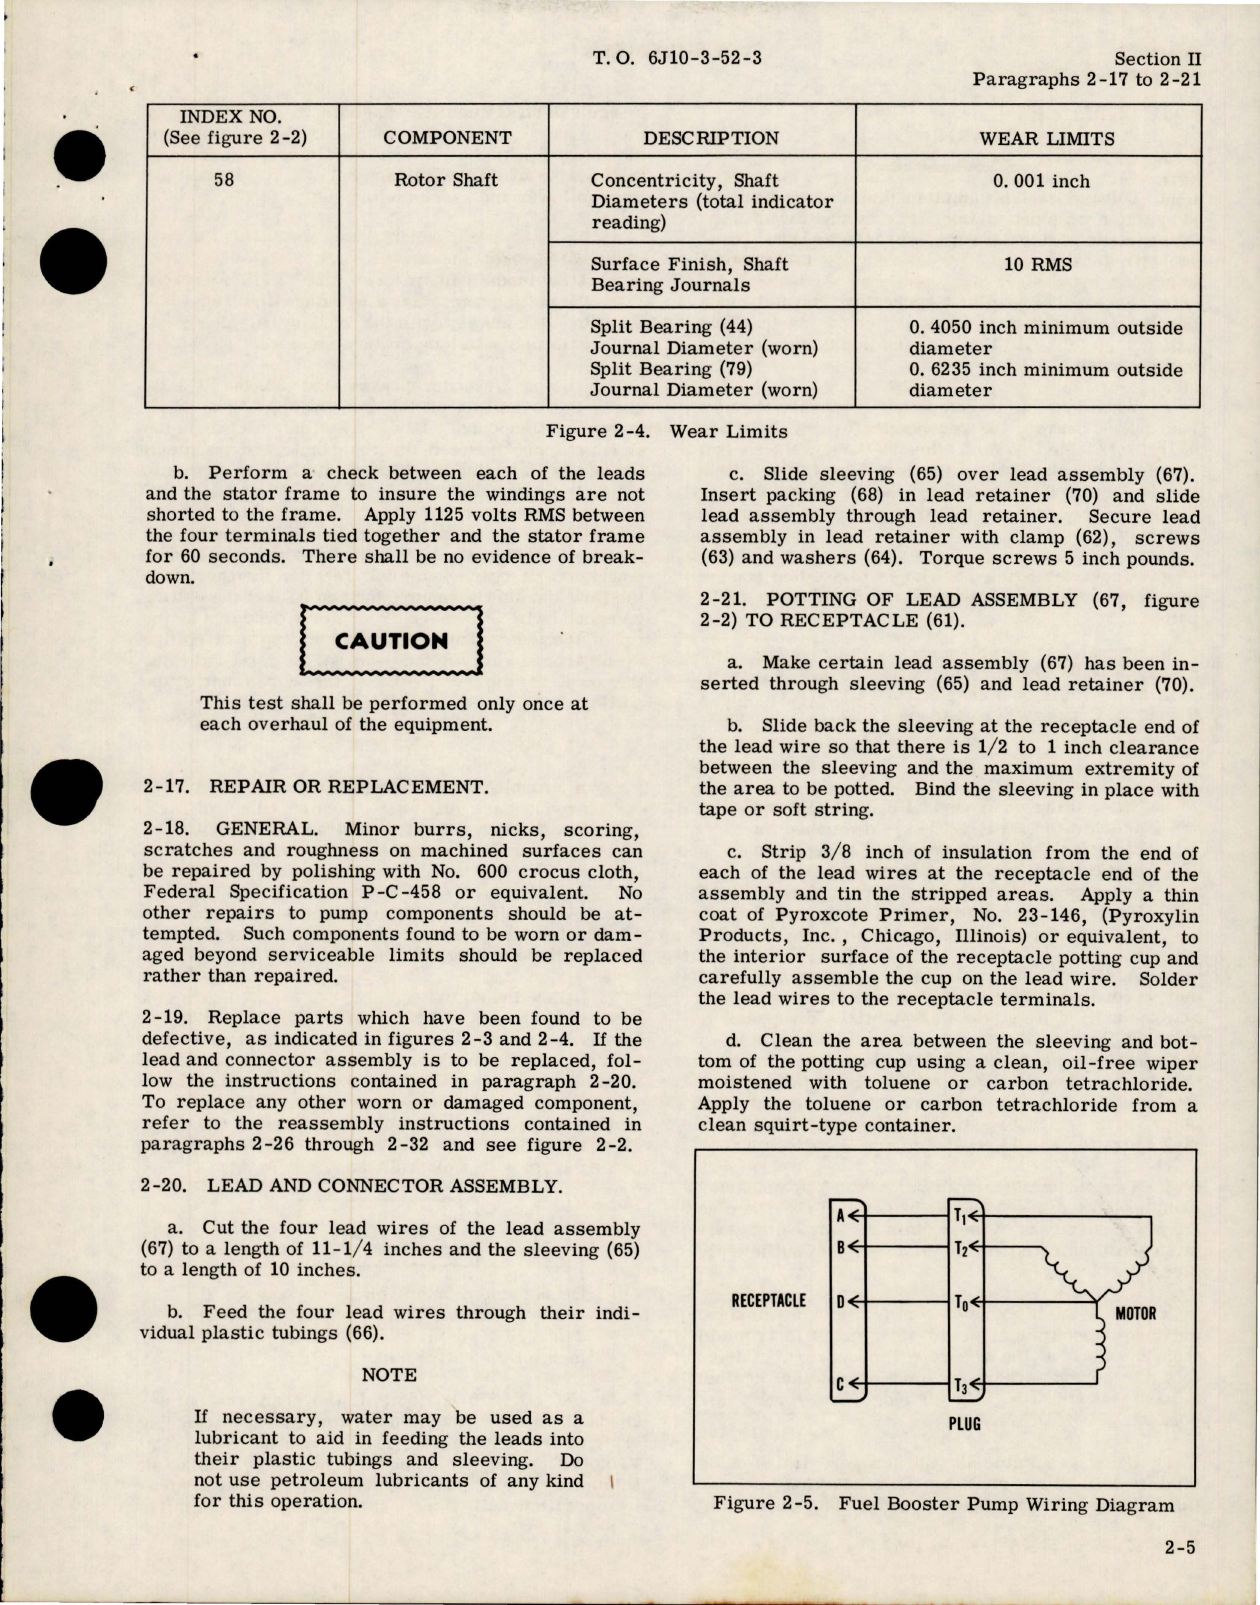 Sample page 5 from AirCorps Library document: Overhaul Manual for Submerged Booster Pumps - Models TB102200, TB102200-2, XTB102200